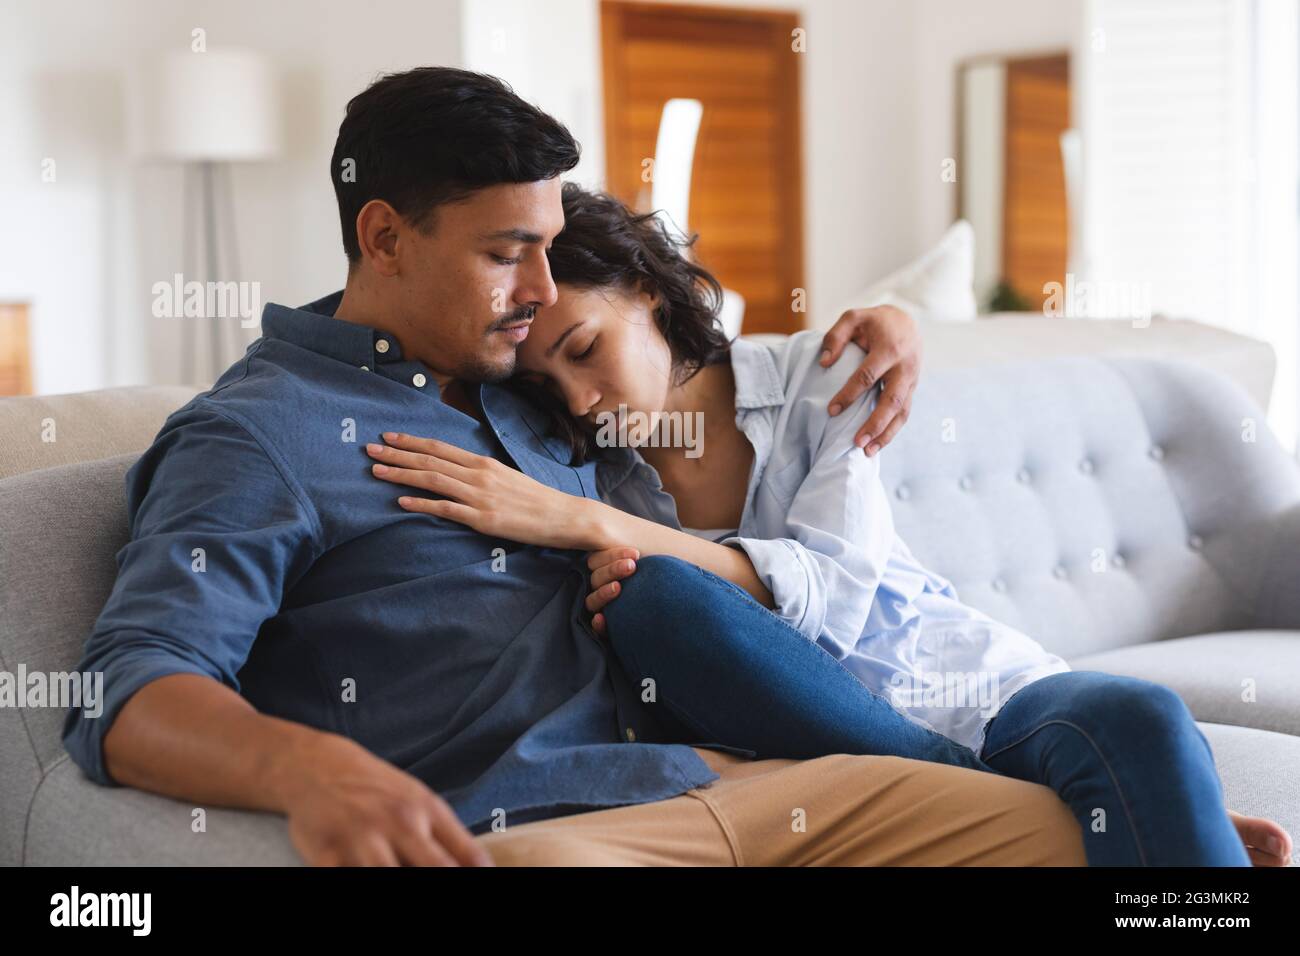 Sad hispanic couple sitting on couch in living room embracing Stock Photo